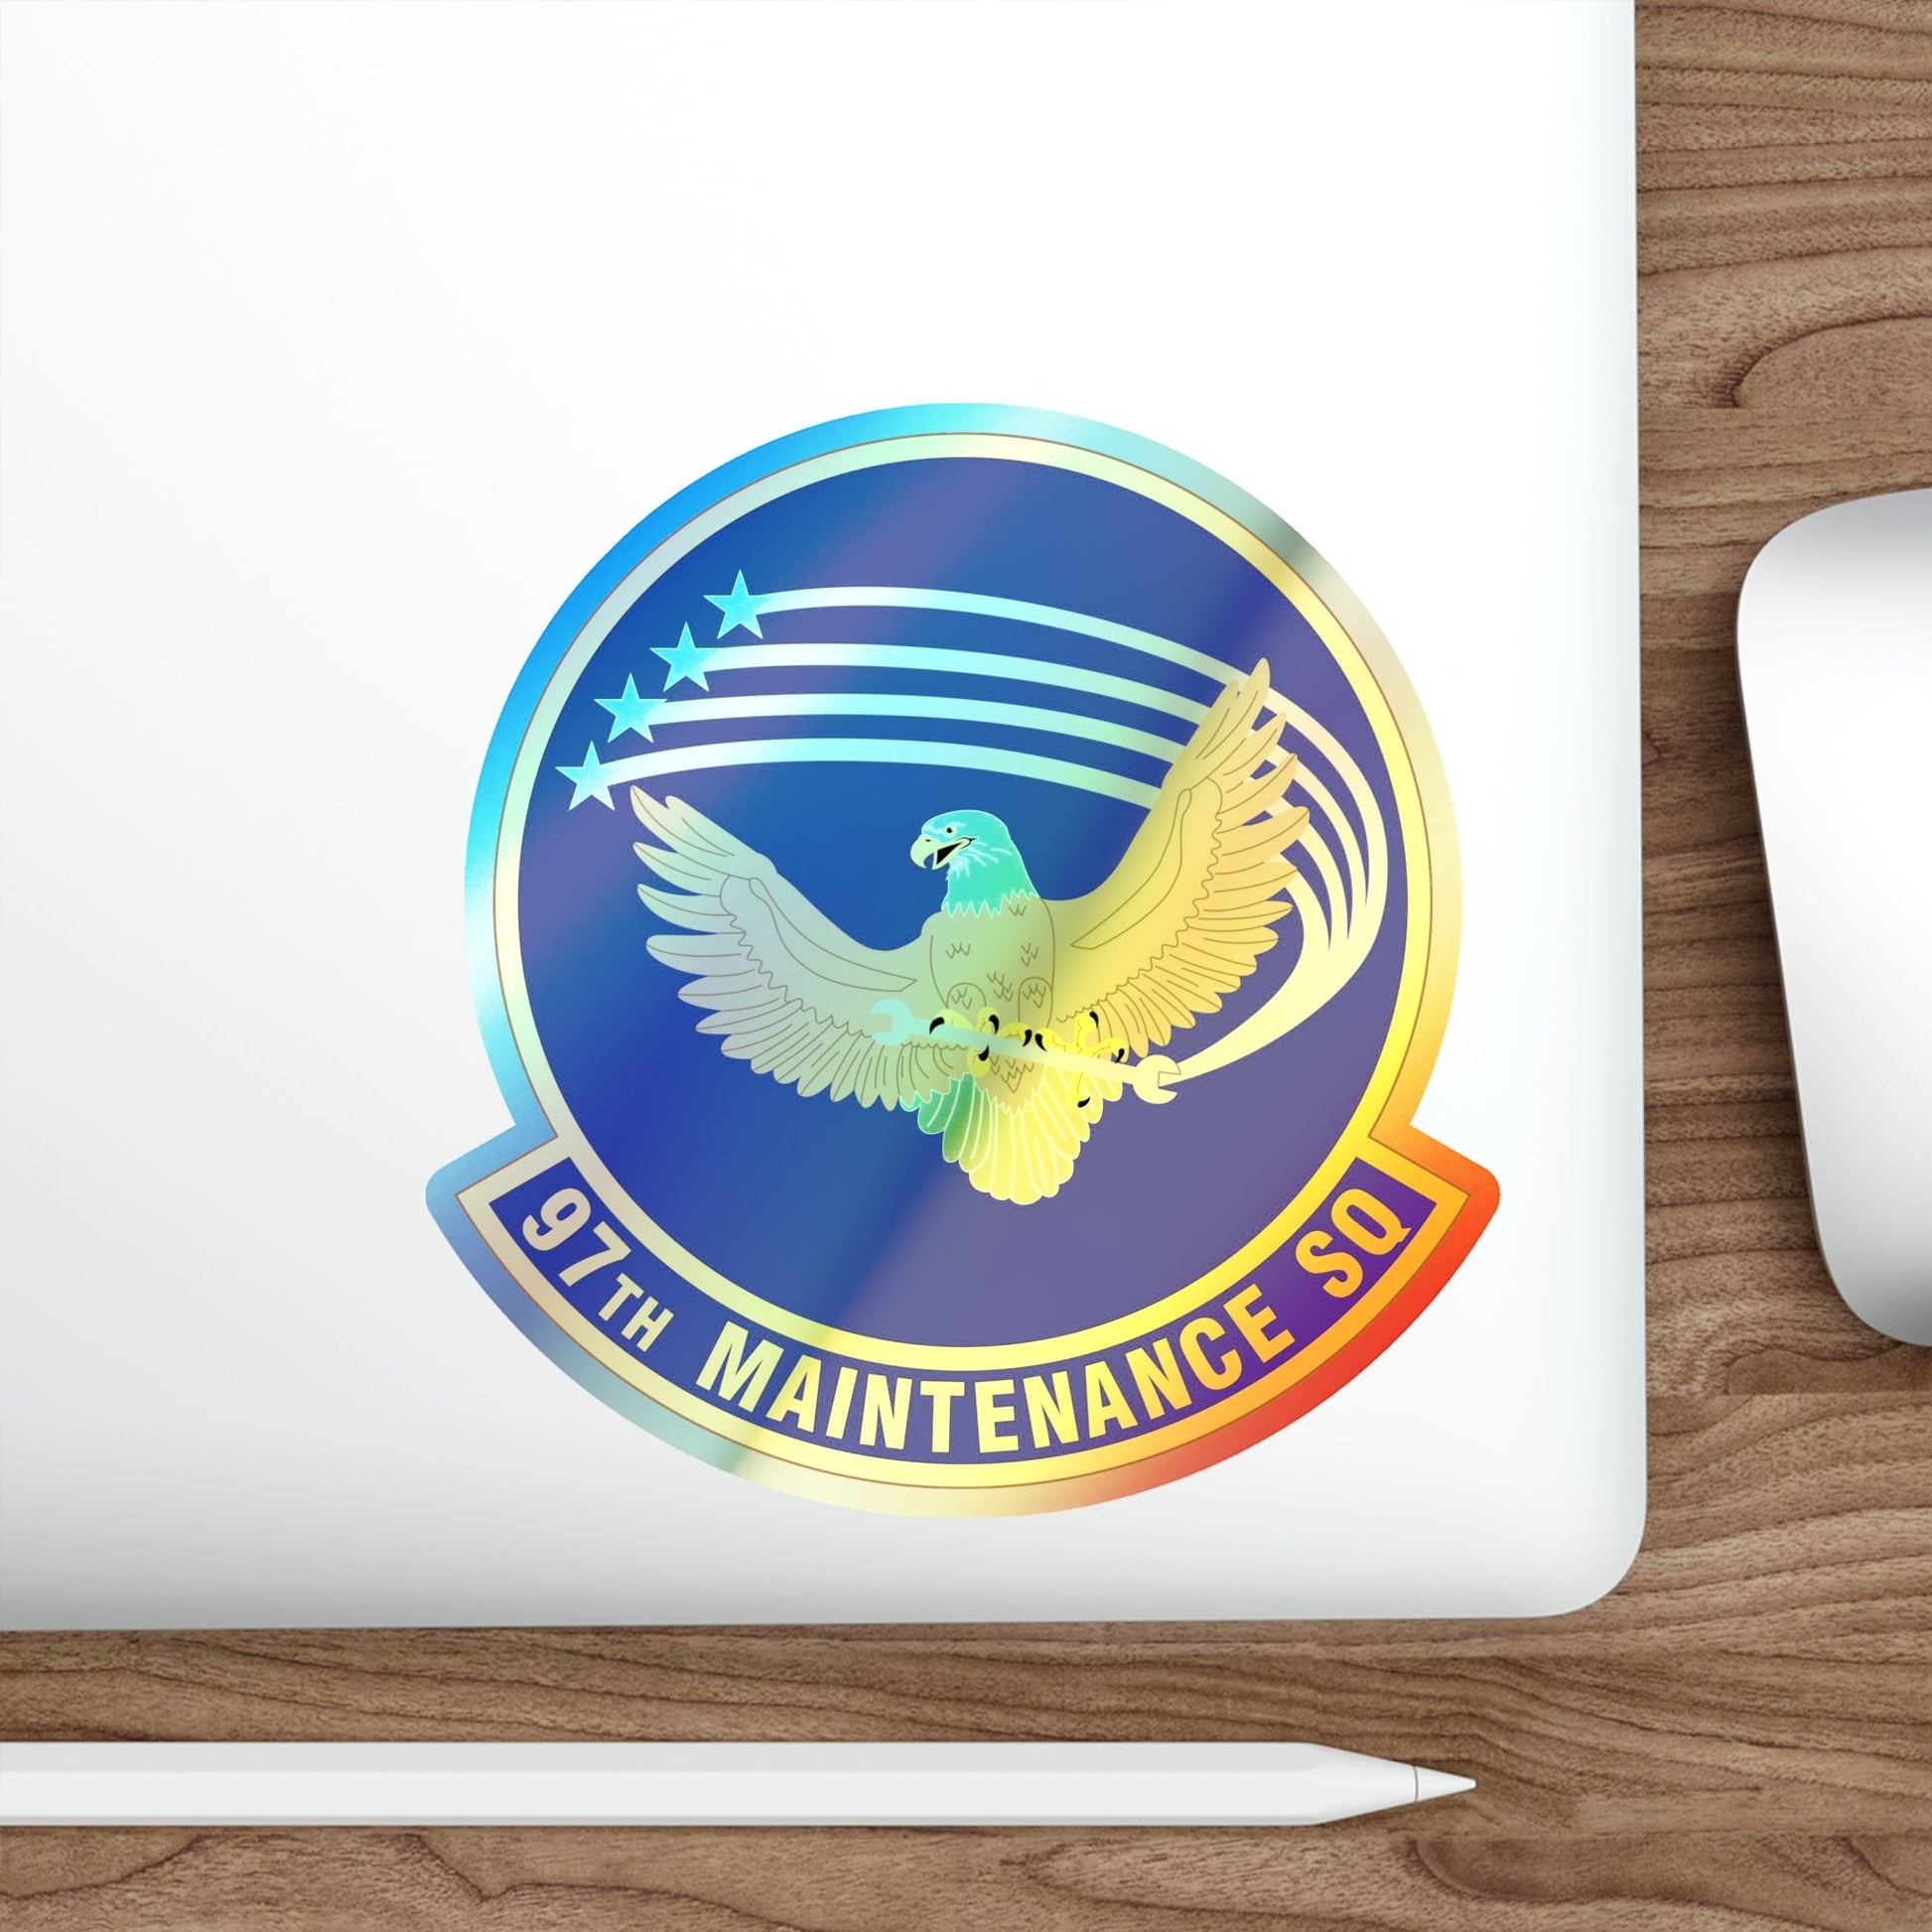 97 Maintenance Squadron AETC (U.S. Air Force) Holographic STICKER Die-Cut Vinyl Decal-The Sticker Space